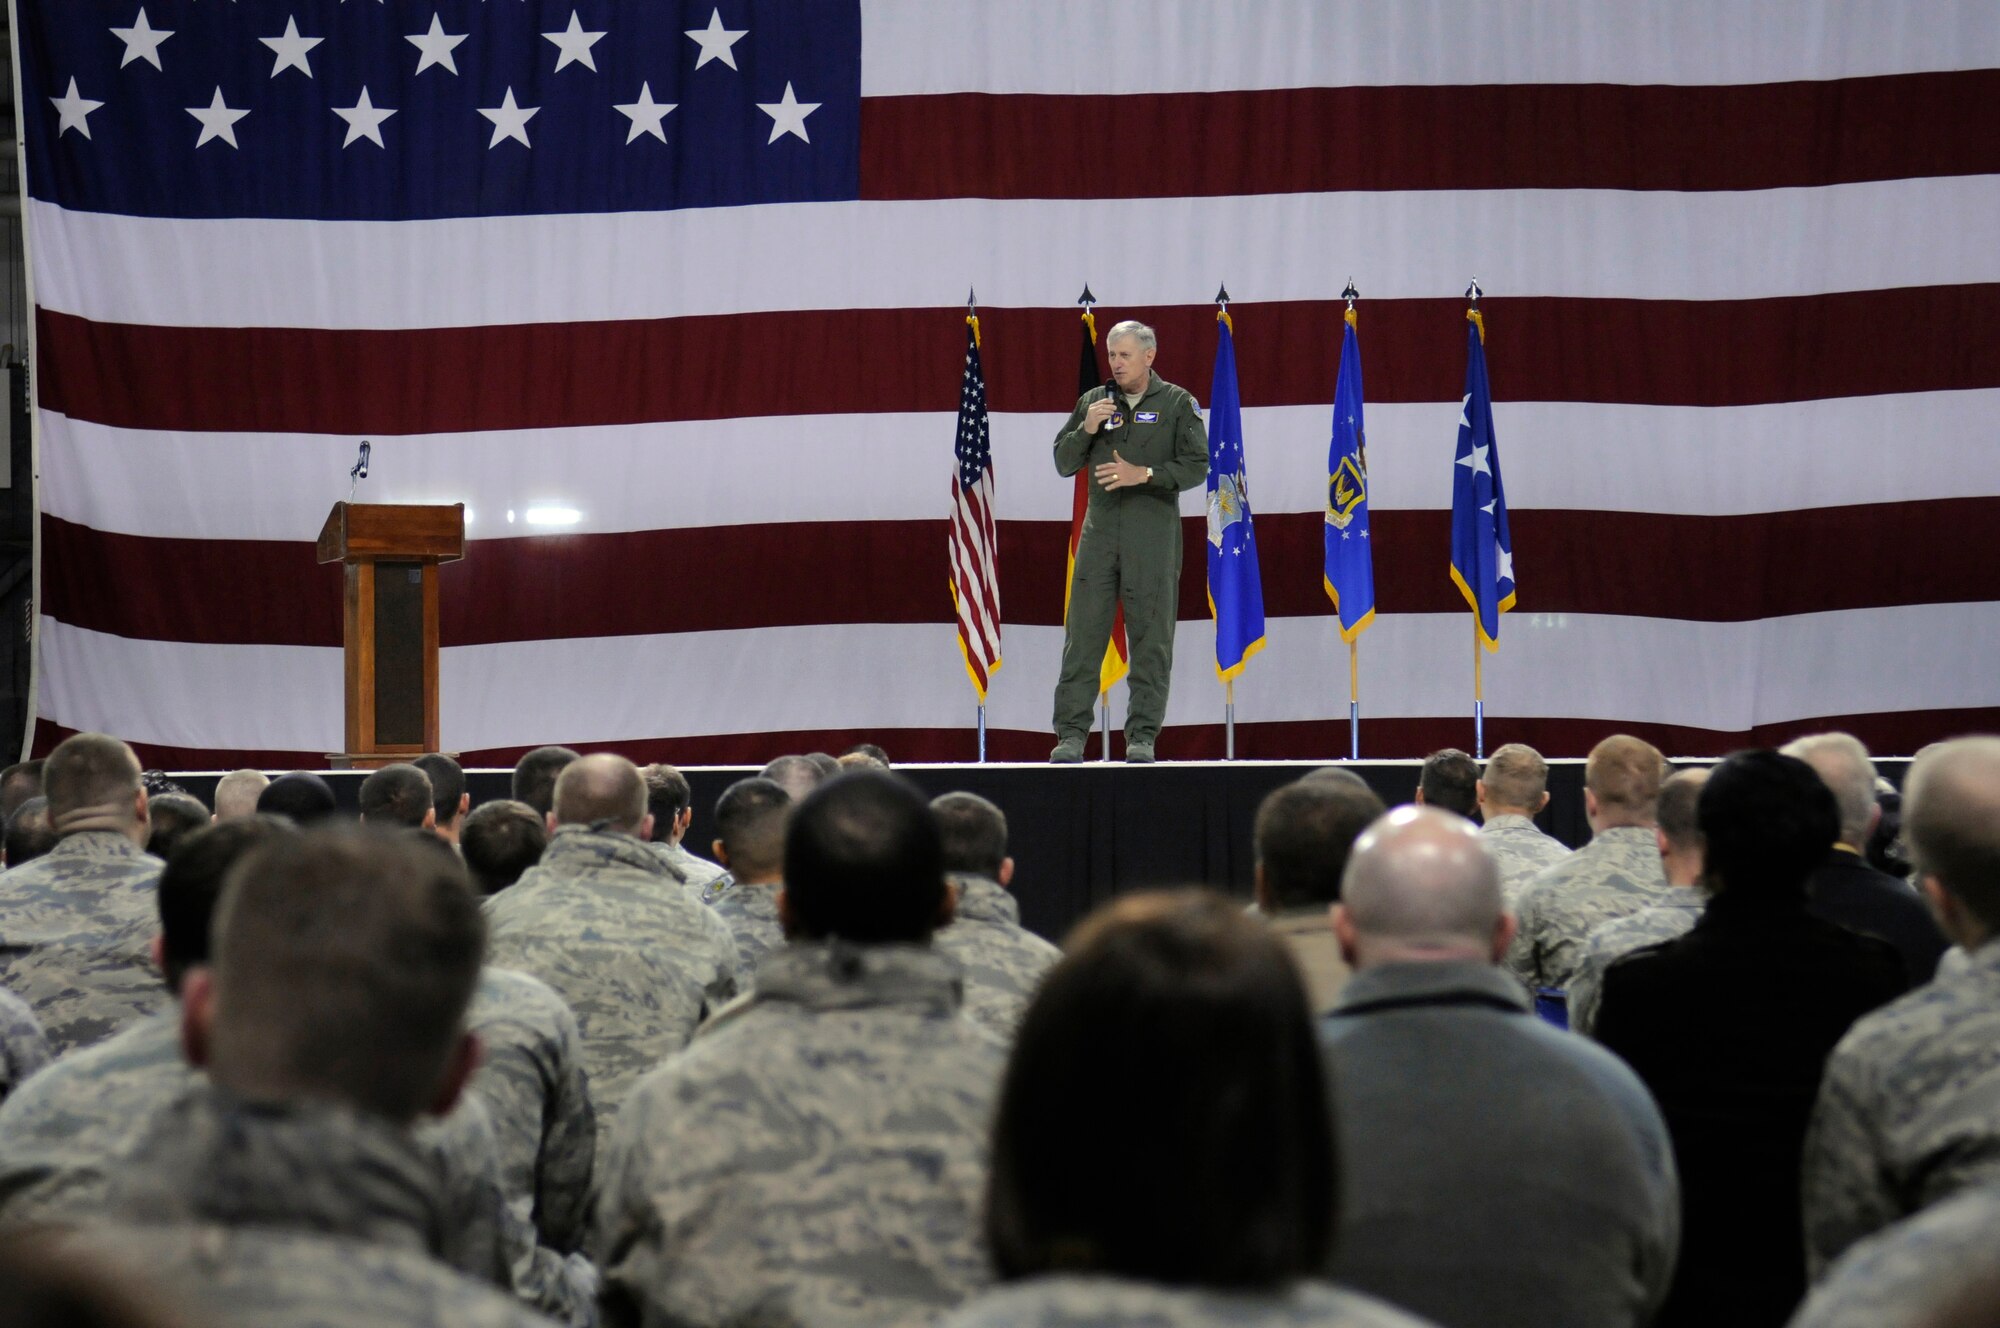 Gen. Roger A. Brady, U.S. Air Forces in Europe commander, speaks to the 86th Airlift Wing, Ramstein Air Base, Germany, during a wing-wide call, March 2. Though a frequent customer of many of the services the wing provides due to his residency here, the general's visit to the wing this time was special as it focused on recognizing various wing Airmen and relaying key messages in regards to the future of the force.  (U.S. Air Force Photo by: Airman 1st Class Brittany Perry)